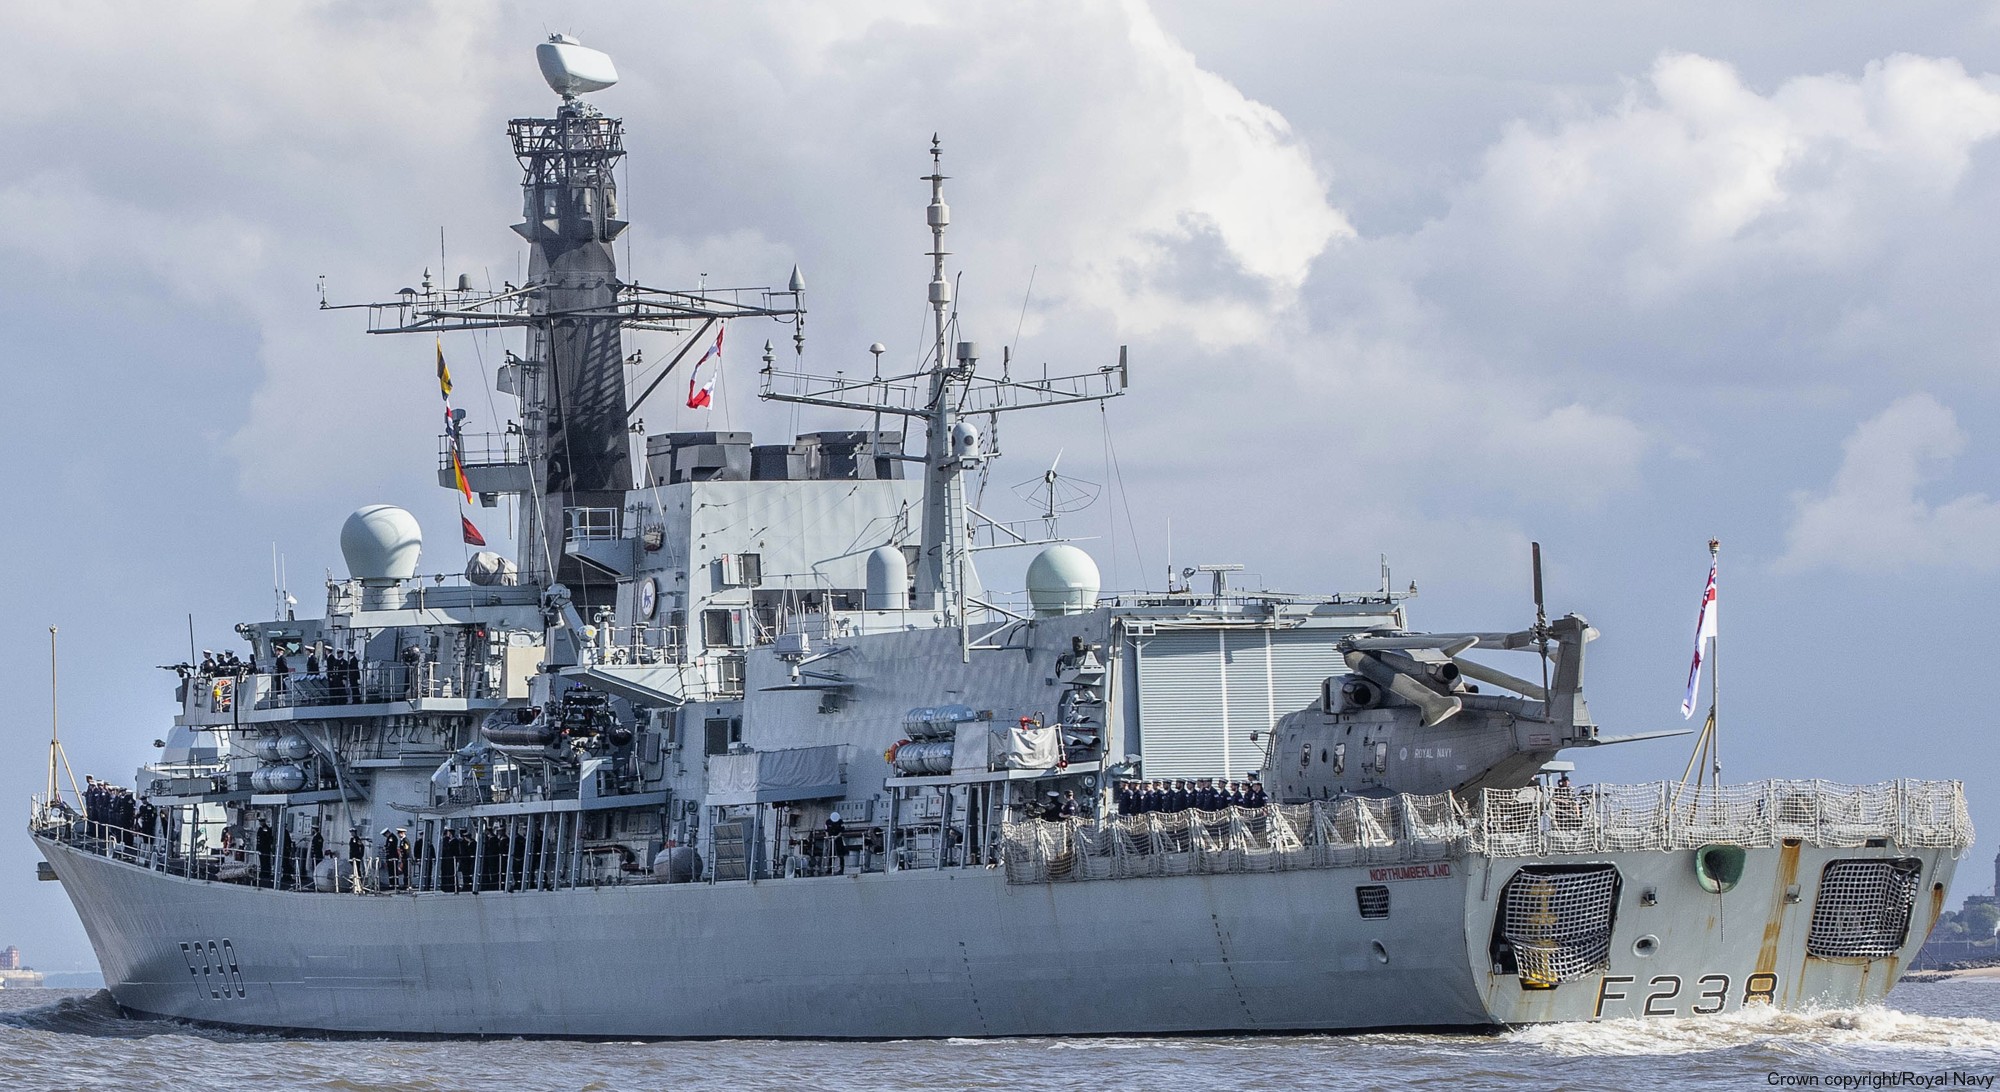 f-238 hms northumberland type 23 duke class guided missile frigate royal navy 17